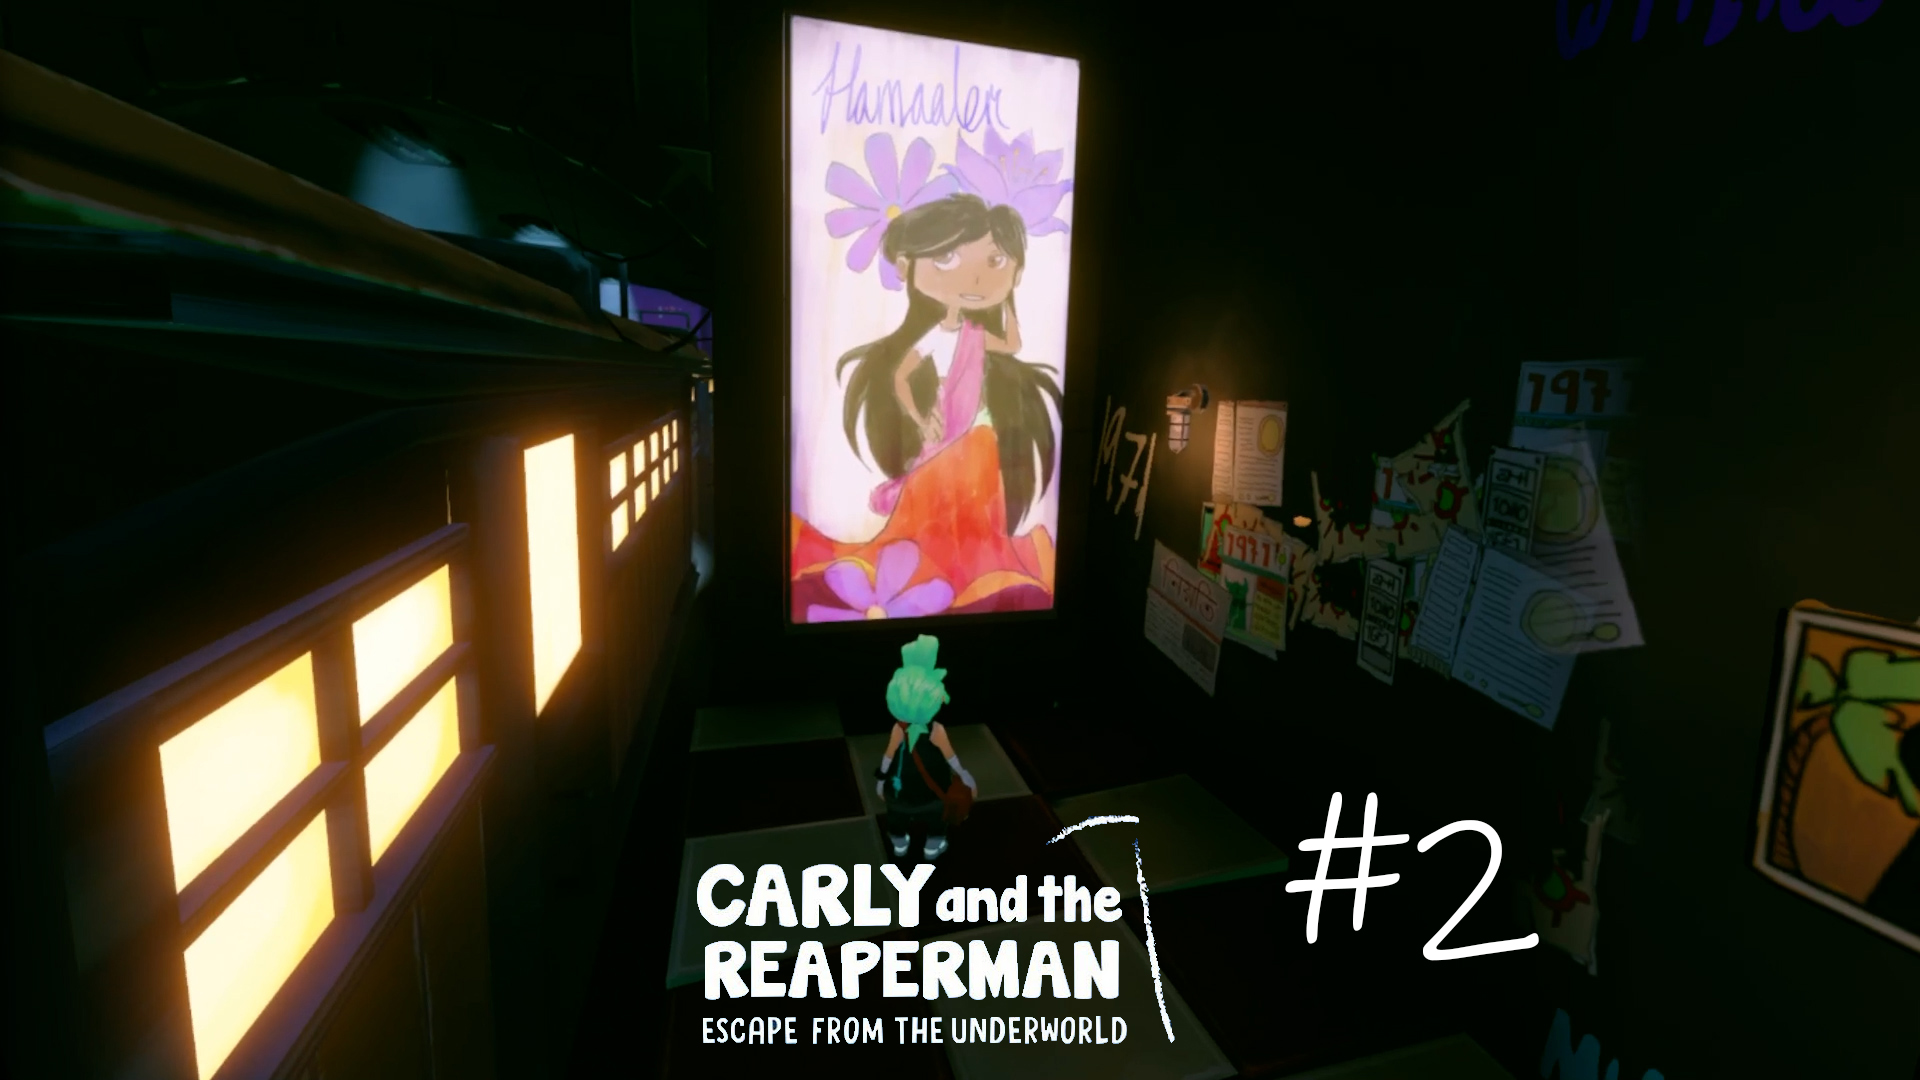 Carly and the Reaperman - Escape from the Underworld #2